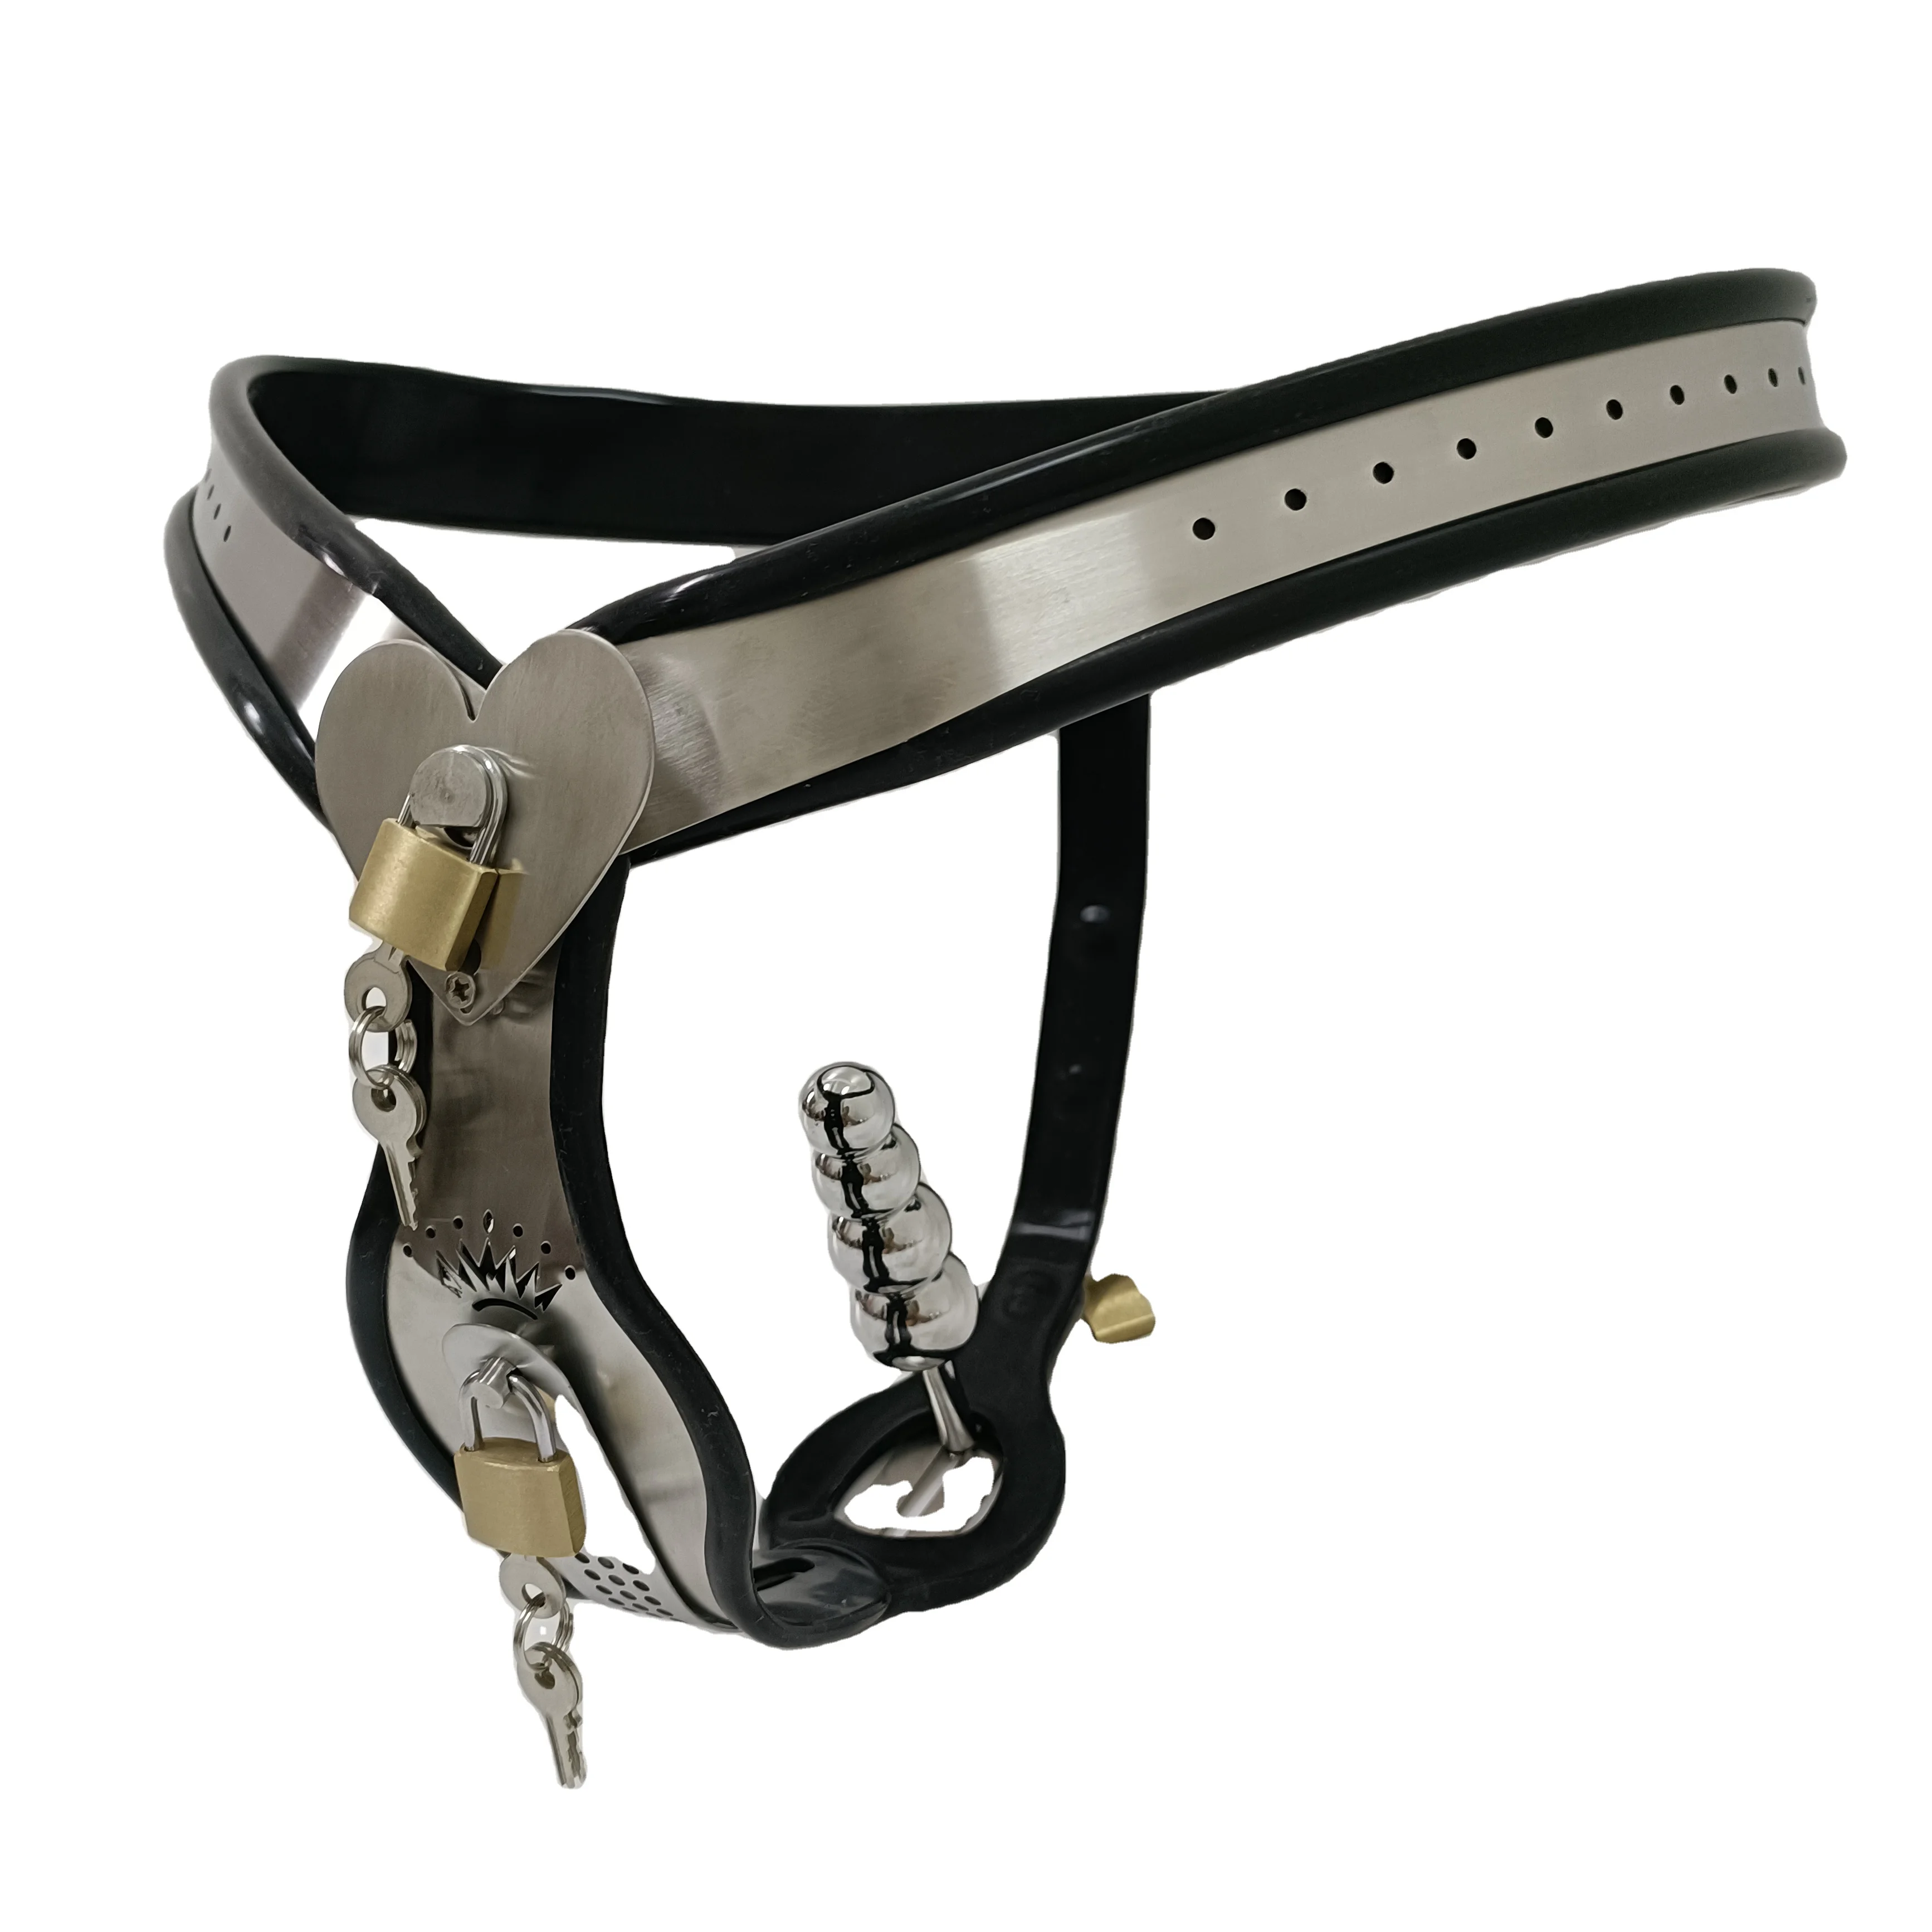 dani janes recommends chastity belt with vibrator pic